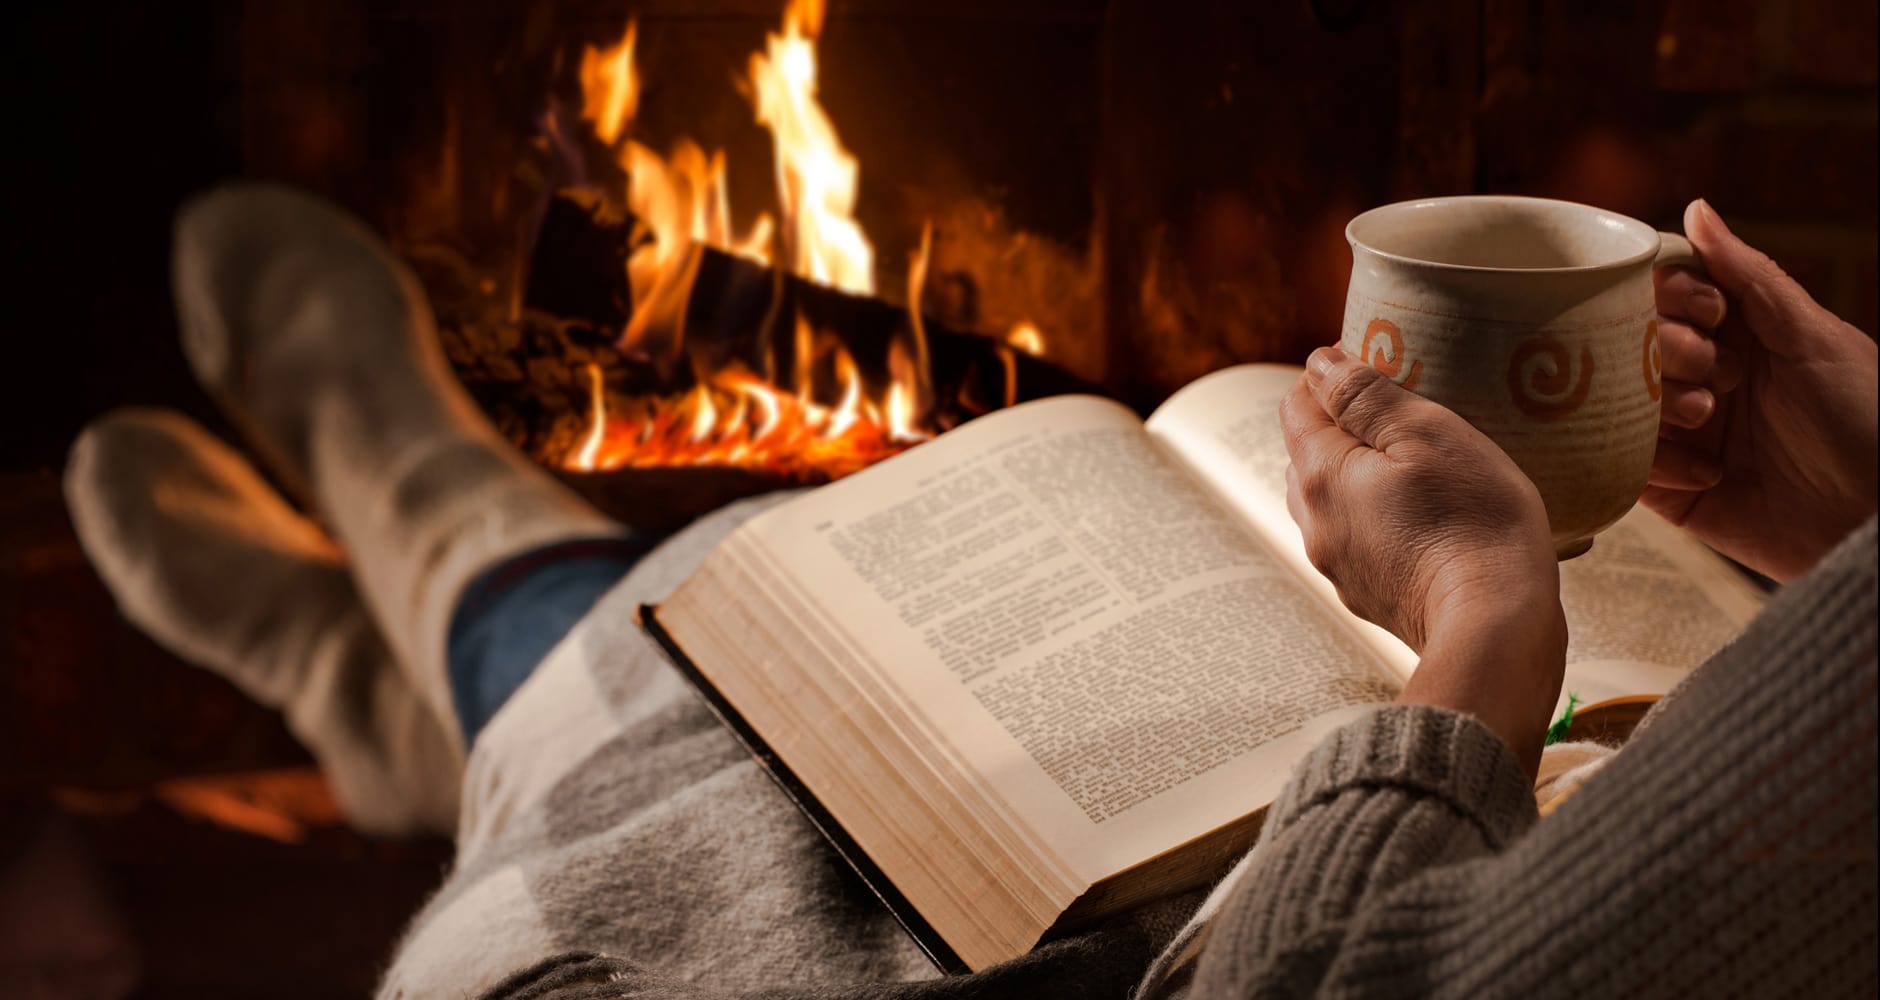 What The Heck is Hygge? - Farmers' Almanac